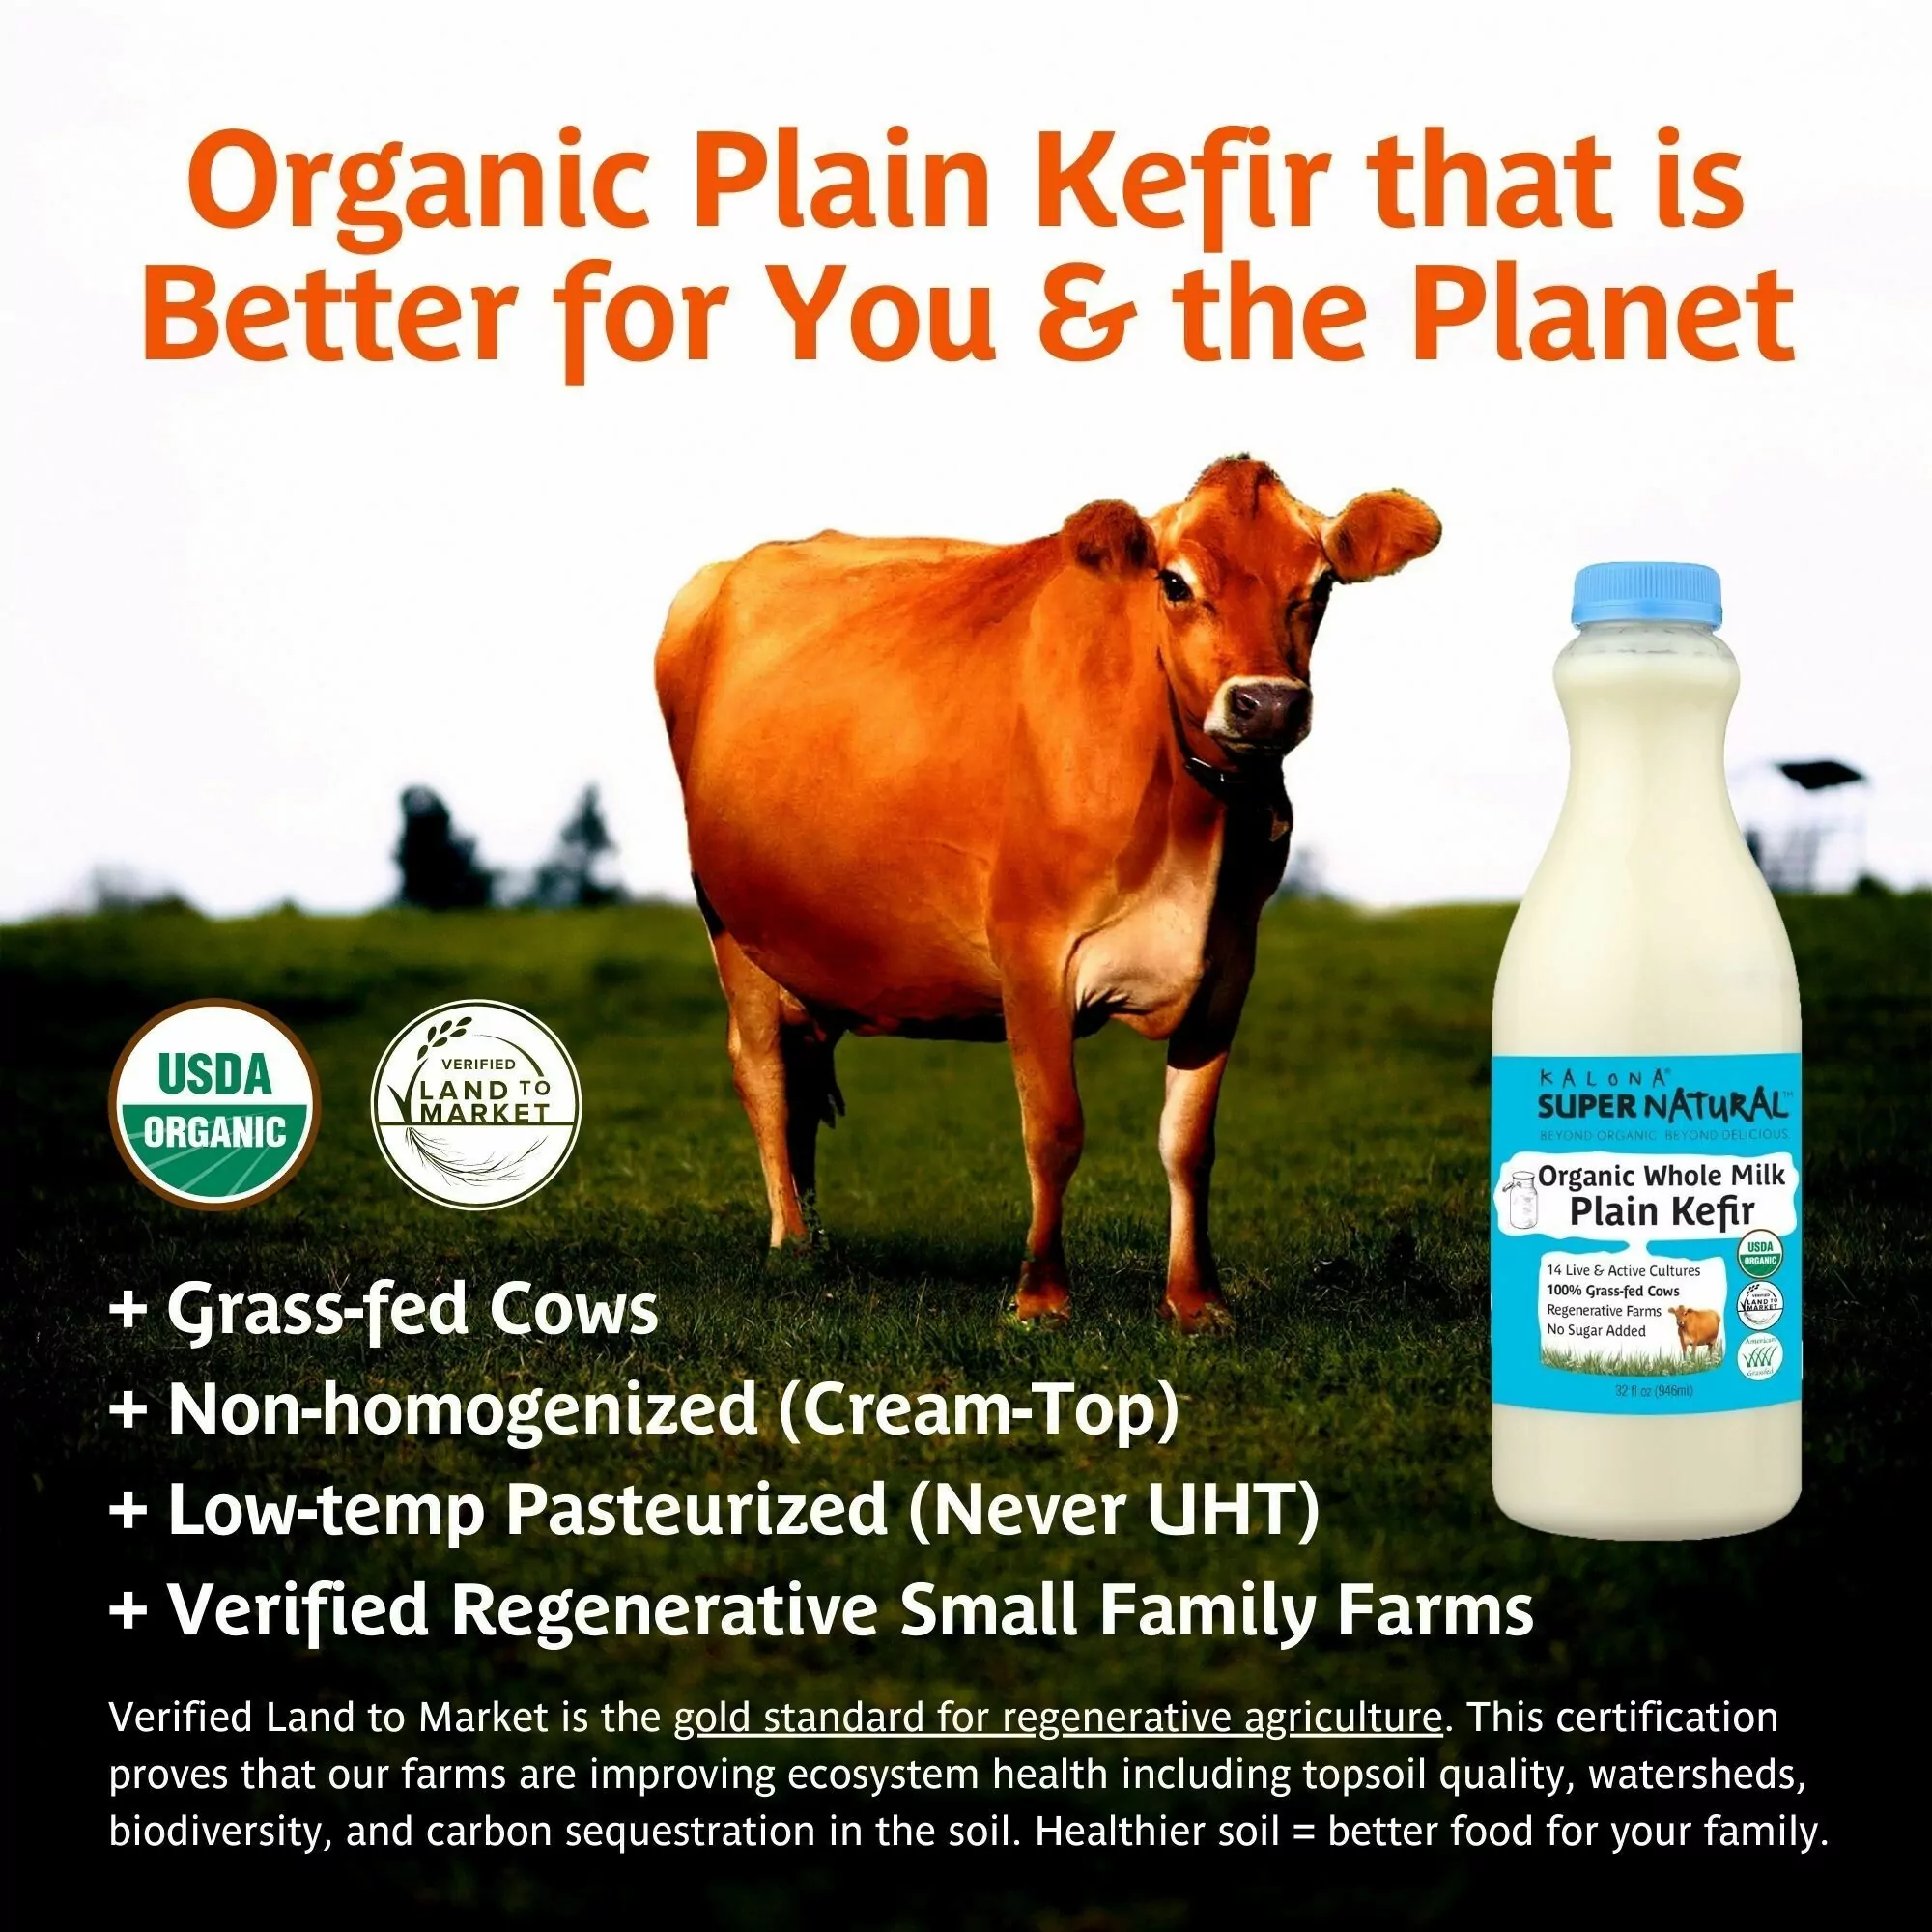 The Truth About Grass-Fed Milk Versus Organic